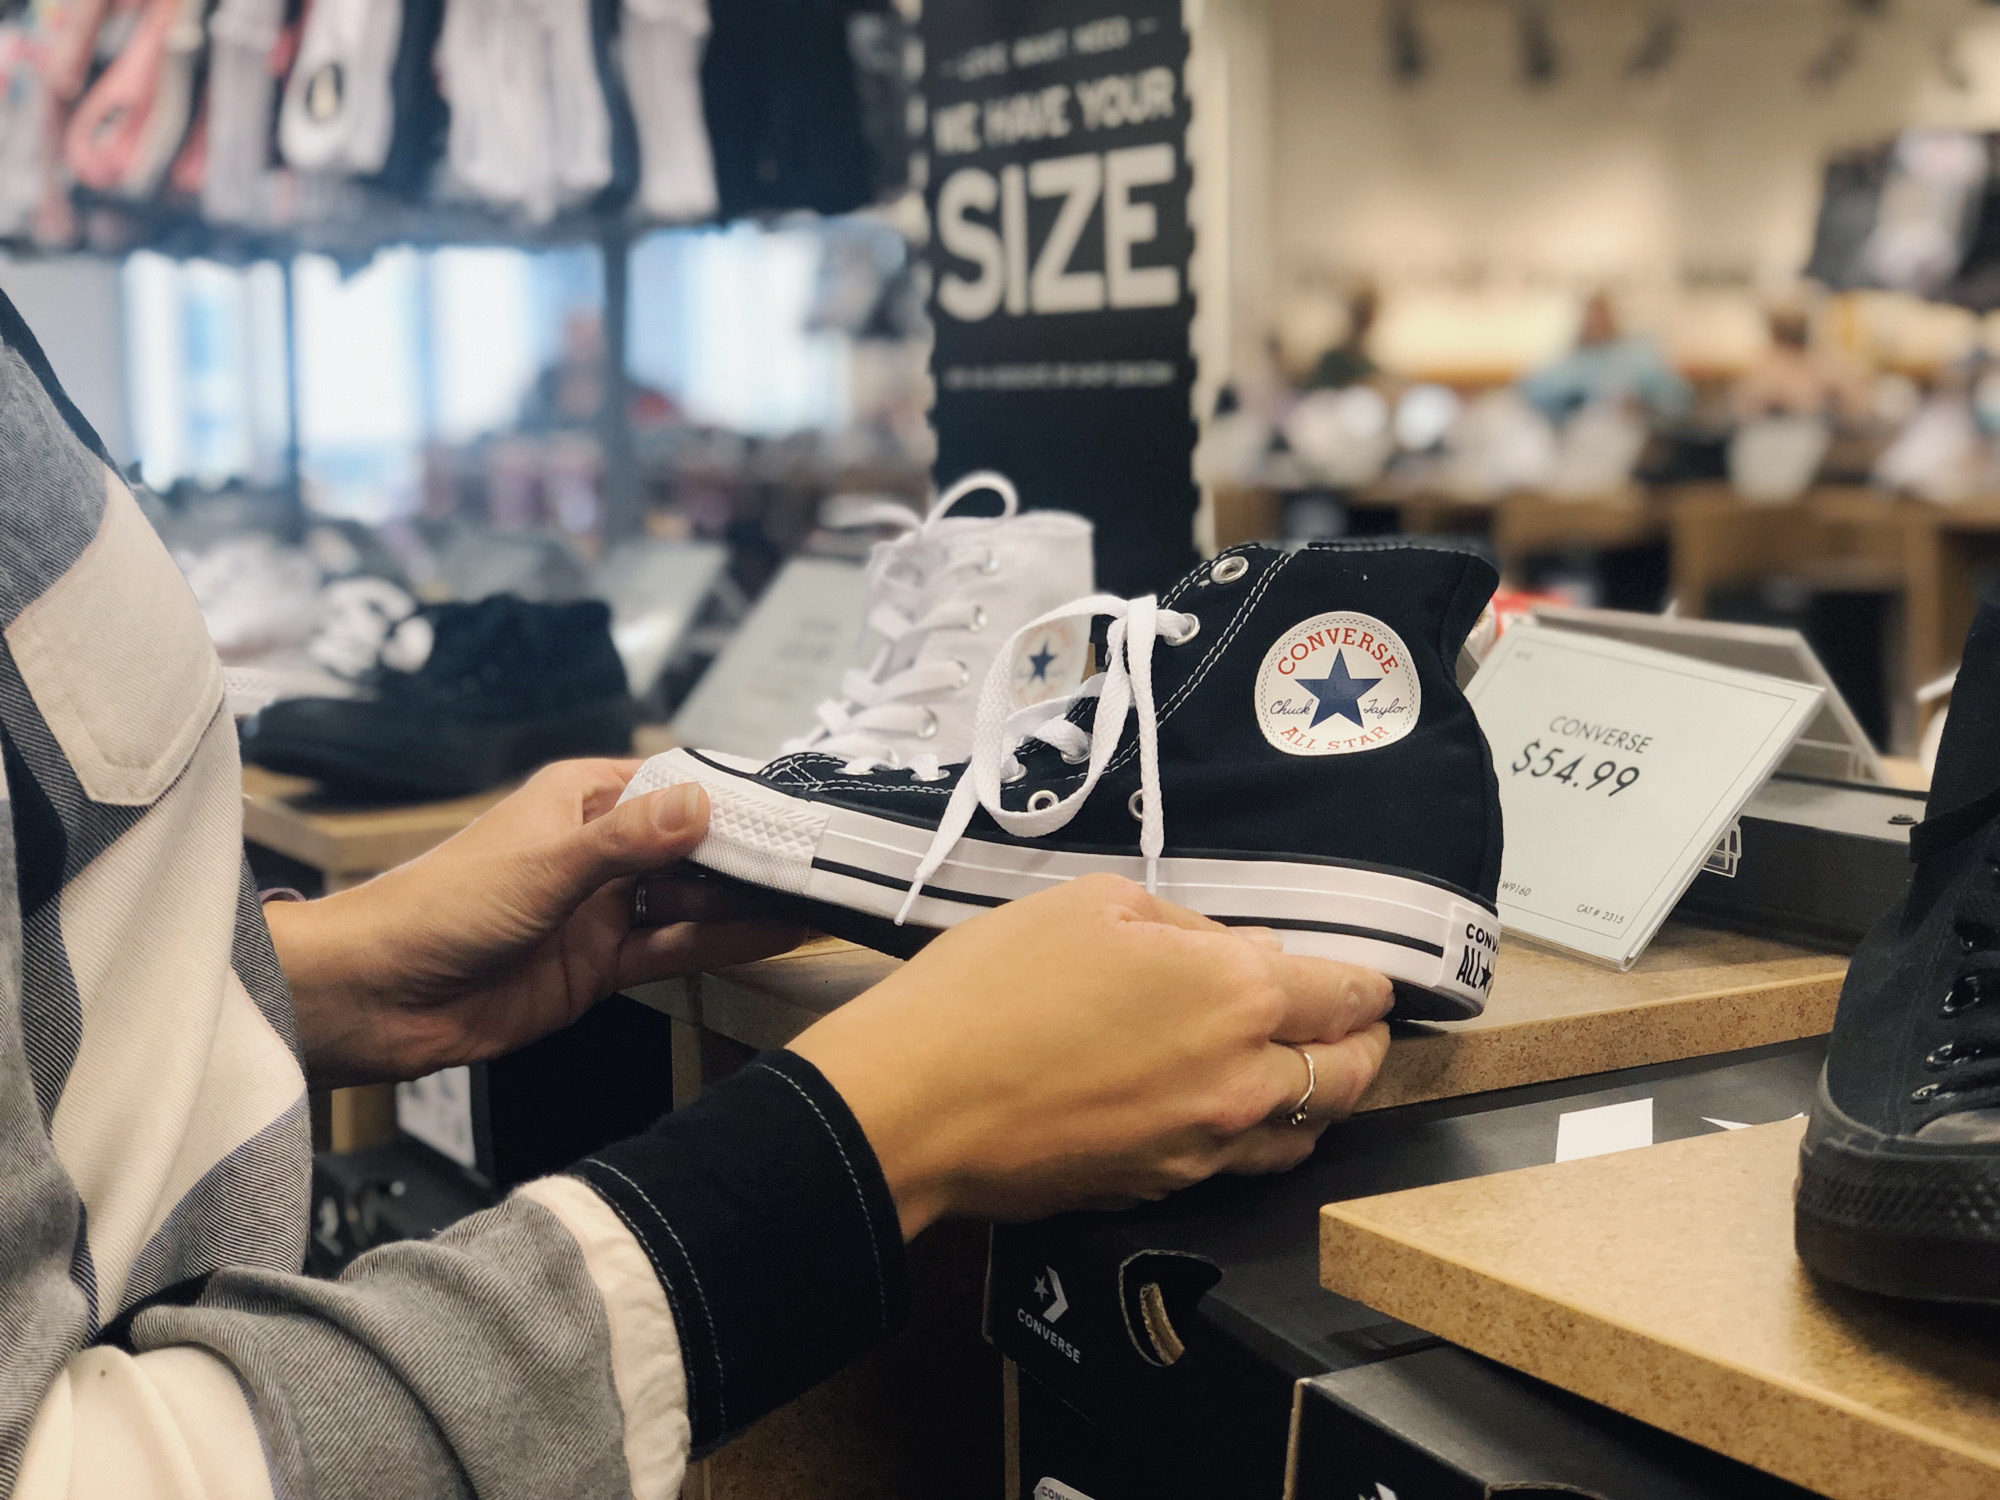 what stores sell converse shoes